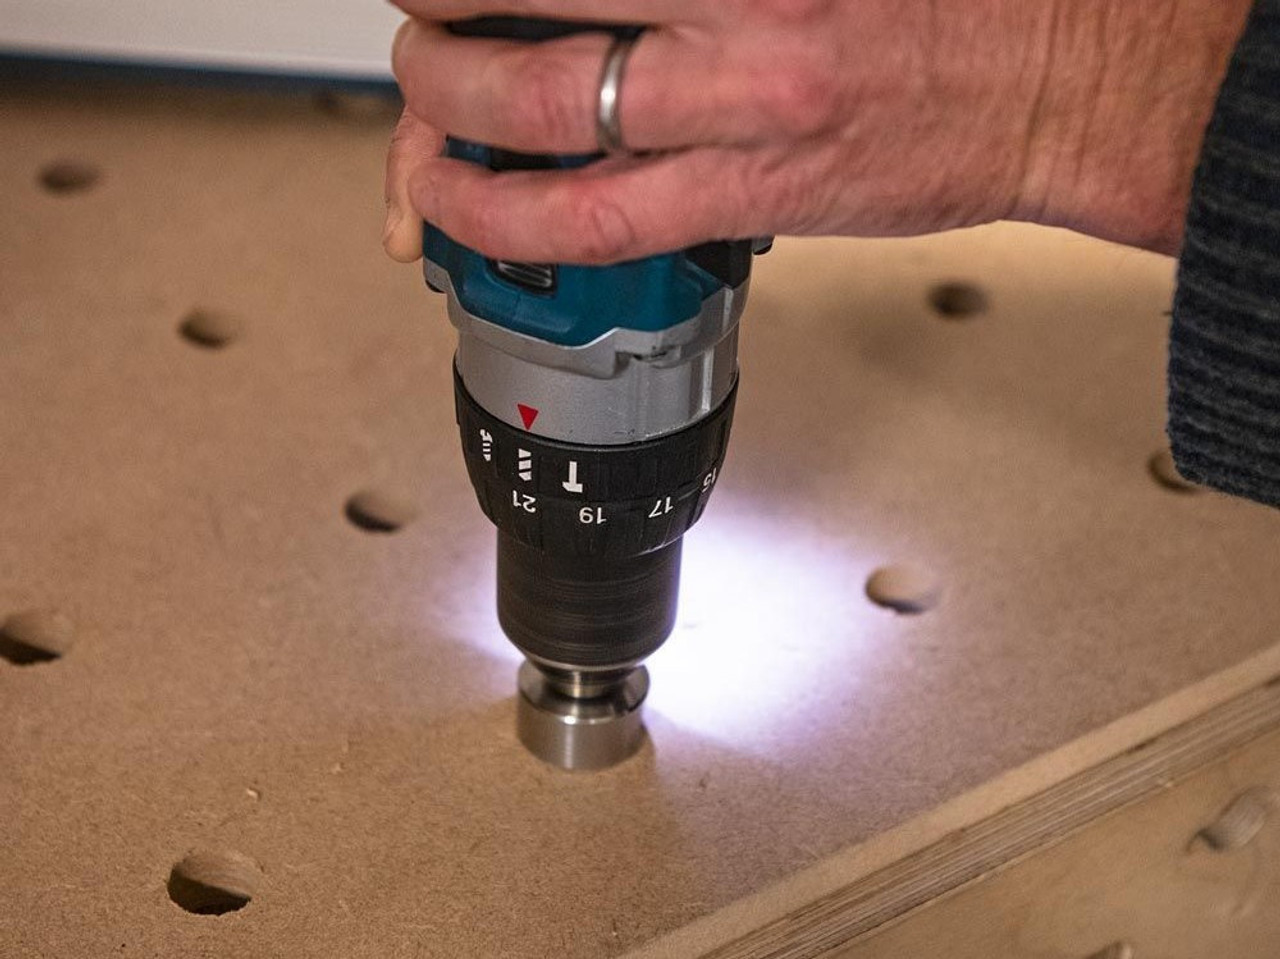 The tool automatically bottoms out, leaving you with the perfect depth of chamfer every time.